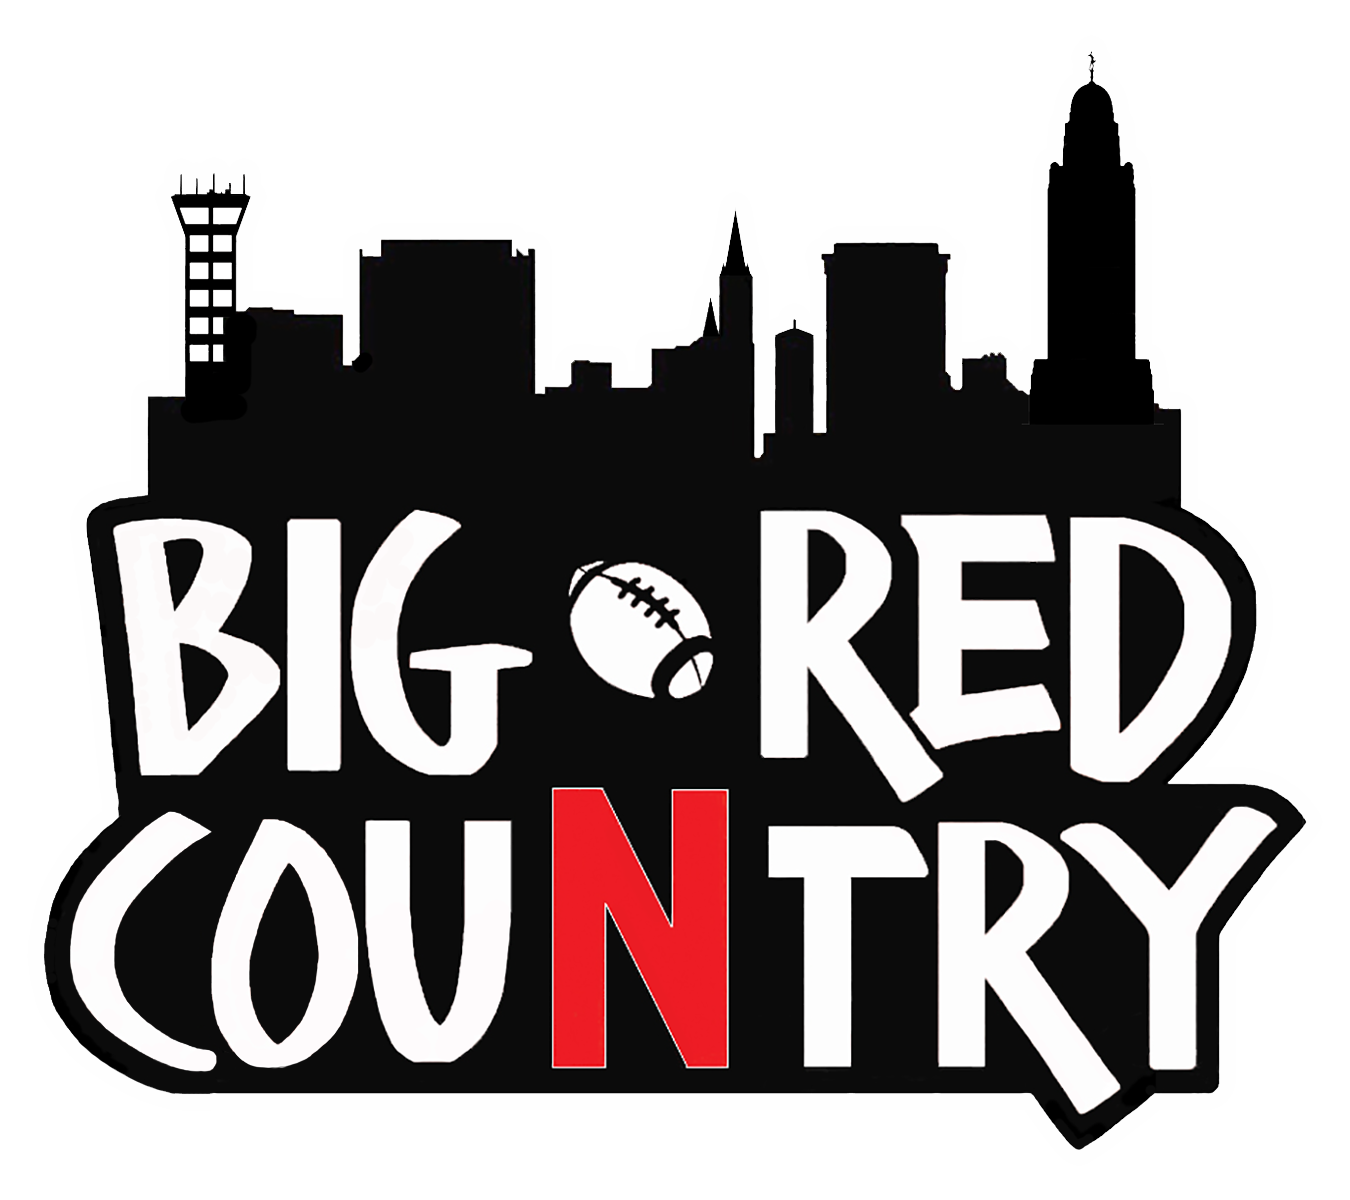 This is Big Red Country